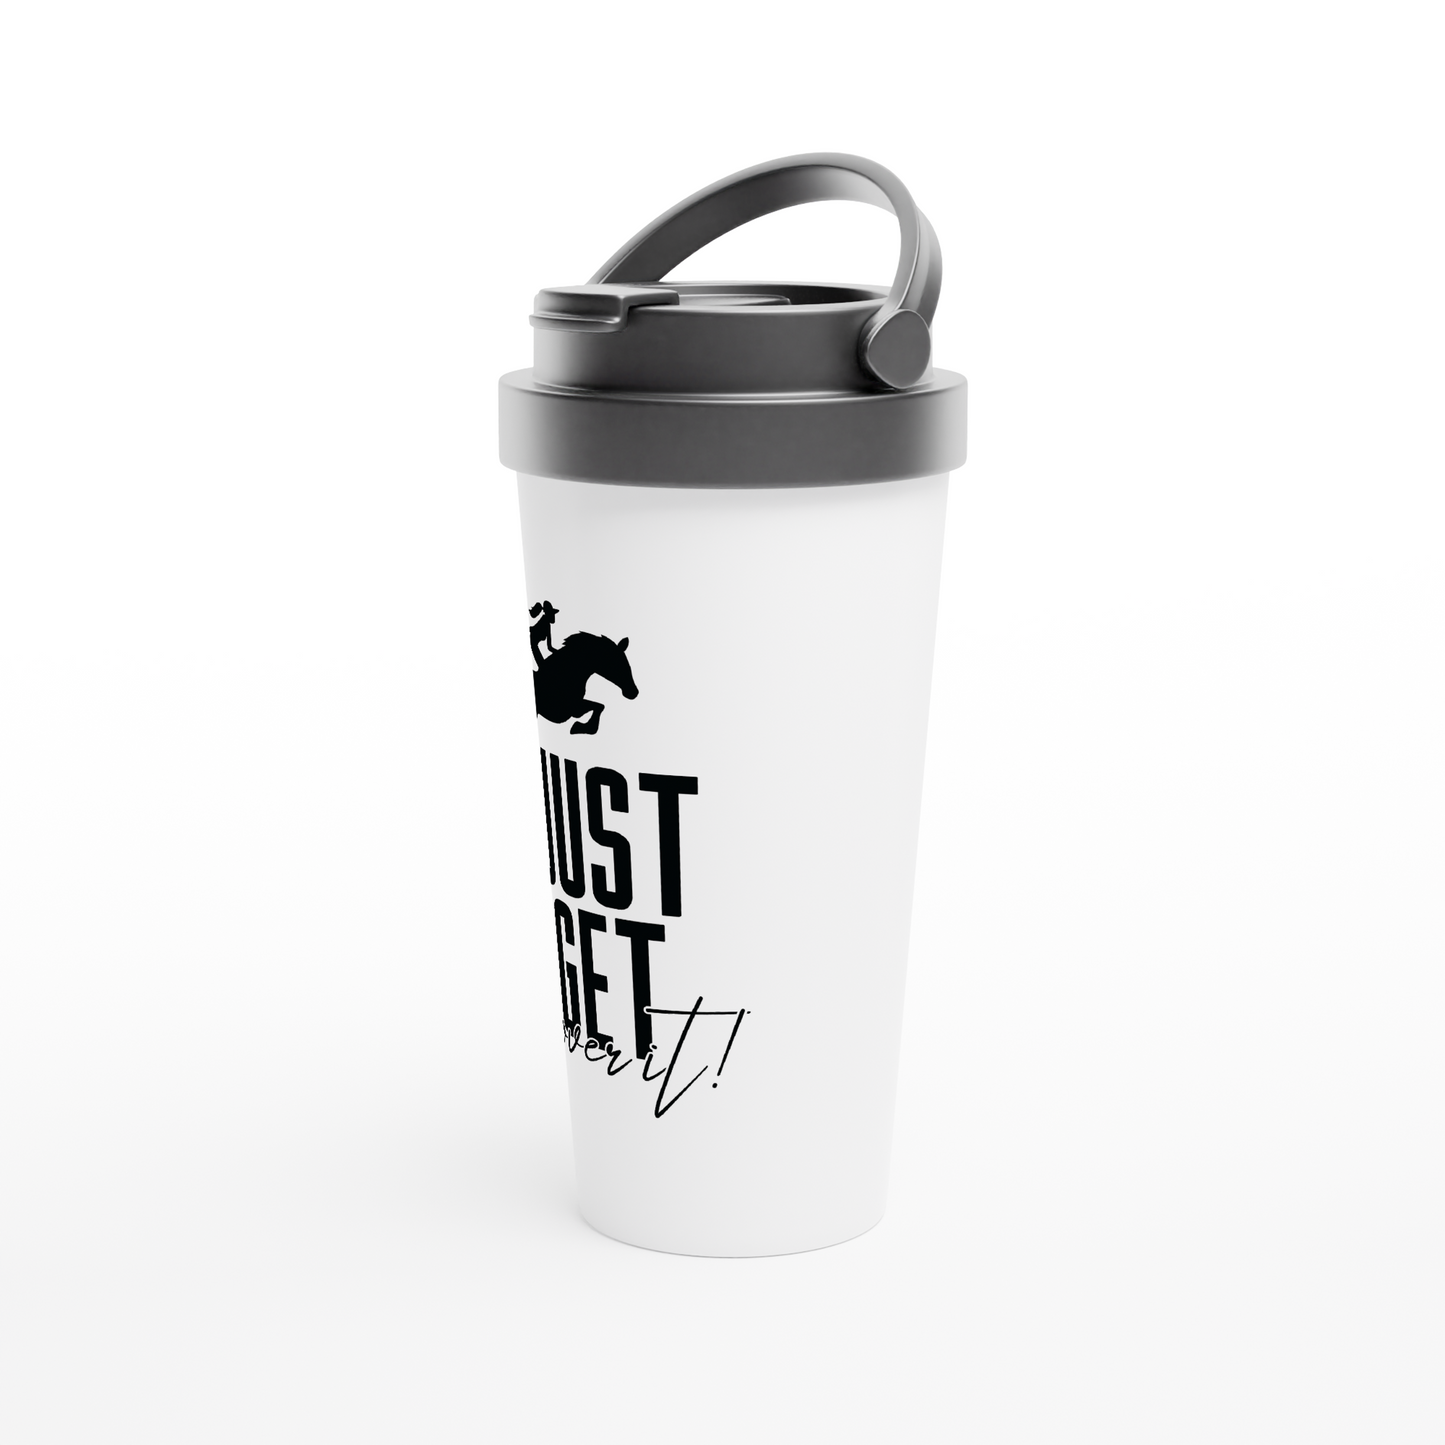 Hand Drawn Horse || 15oz Stainless Steel Travel Mug - Design: "Get Over It"; Static Design; Personalizable Text